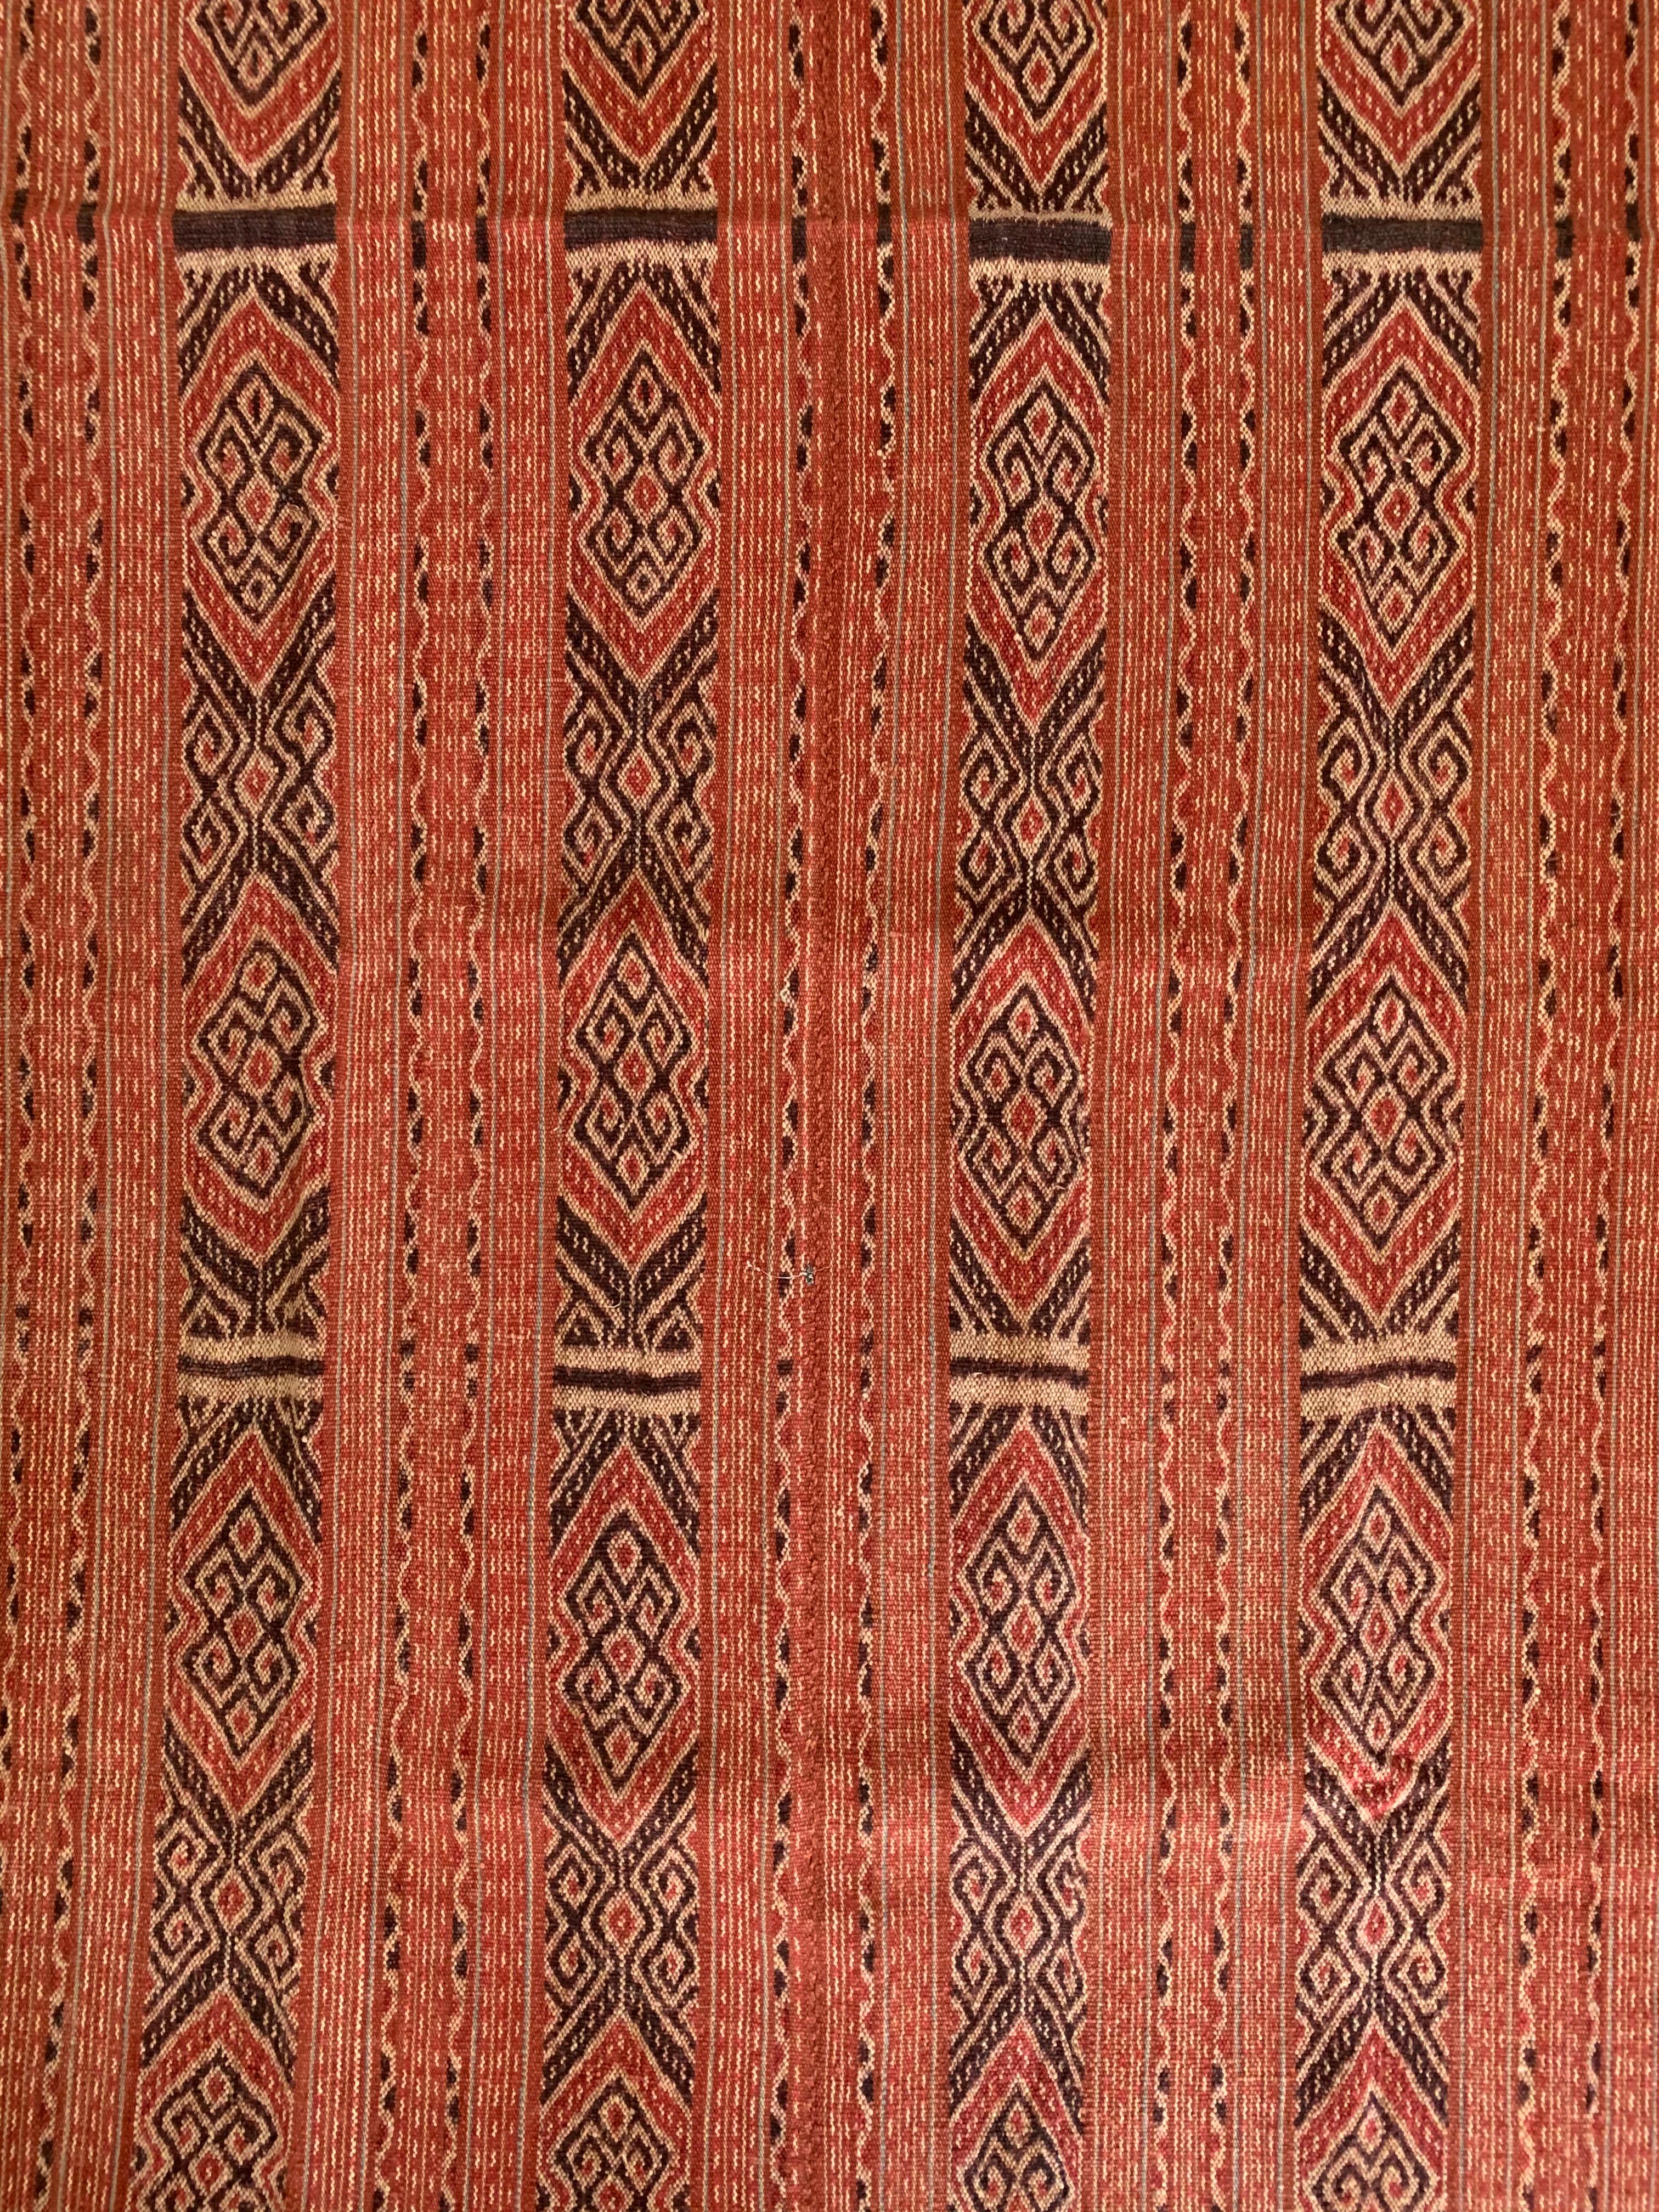 This Ikat textile originates from the Island of Timor, Indonesia. It is hand-woven using naturally dyed yarns via a method passed on through generations. It features a predominantly orange coloured detailing and distinct tribal patterns.